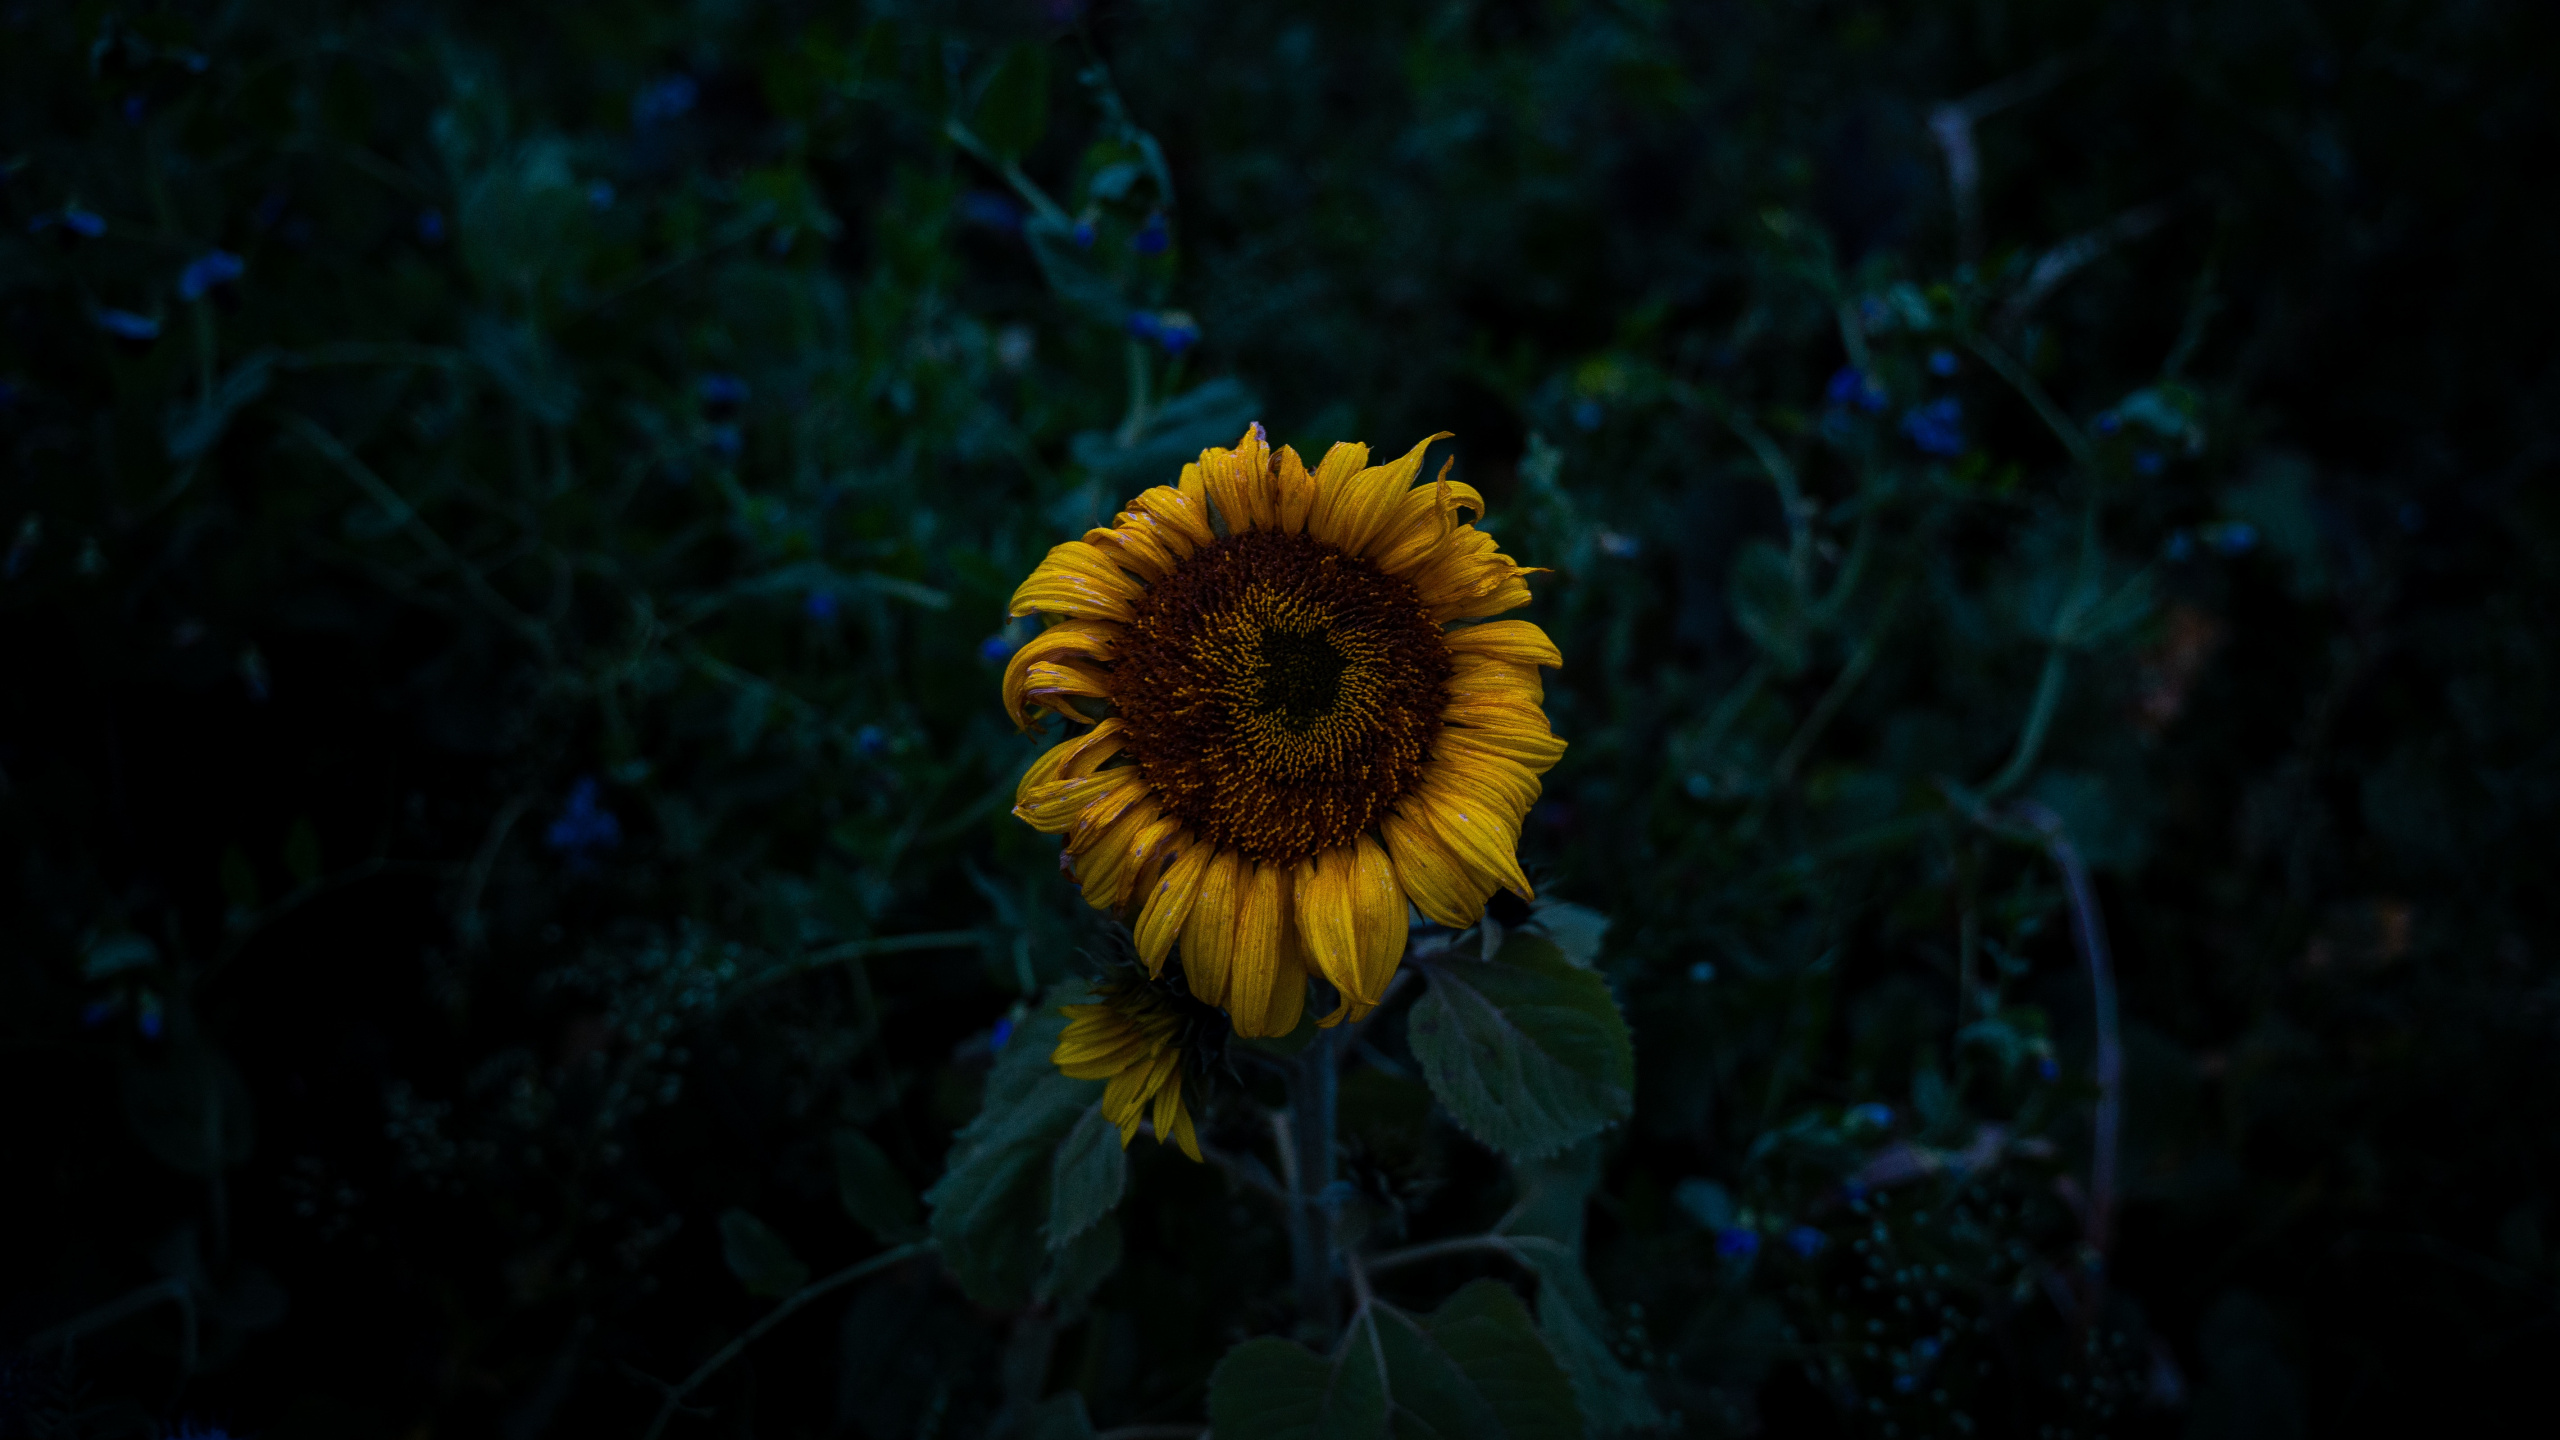 Yellow Sunflower in Bloom During Daytime. Wallpaper in 2560x1440 Resolution